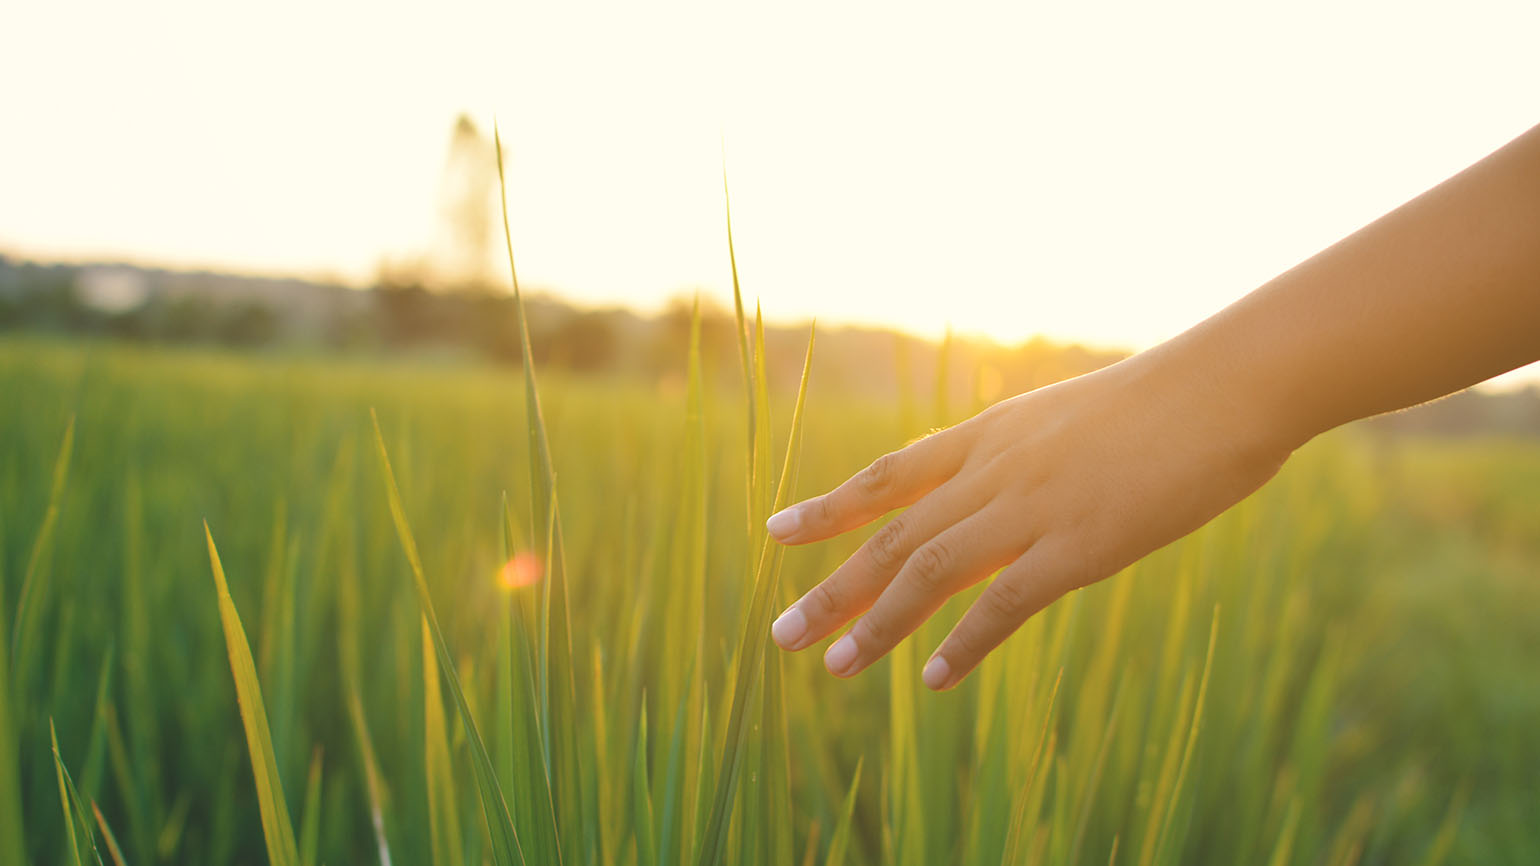 A hand over a green field reaches out to be touched by Jesus